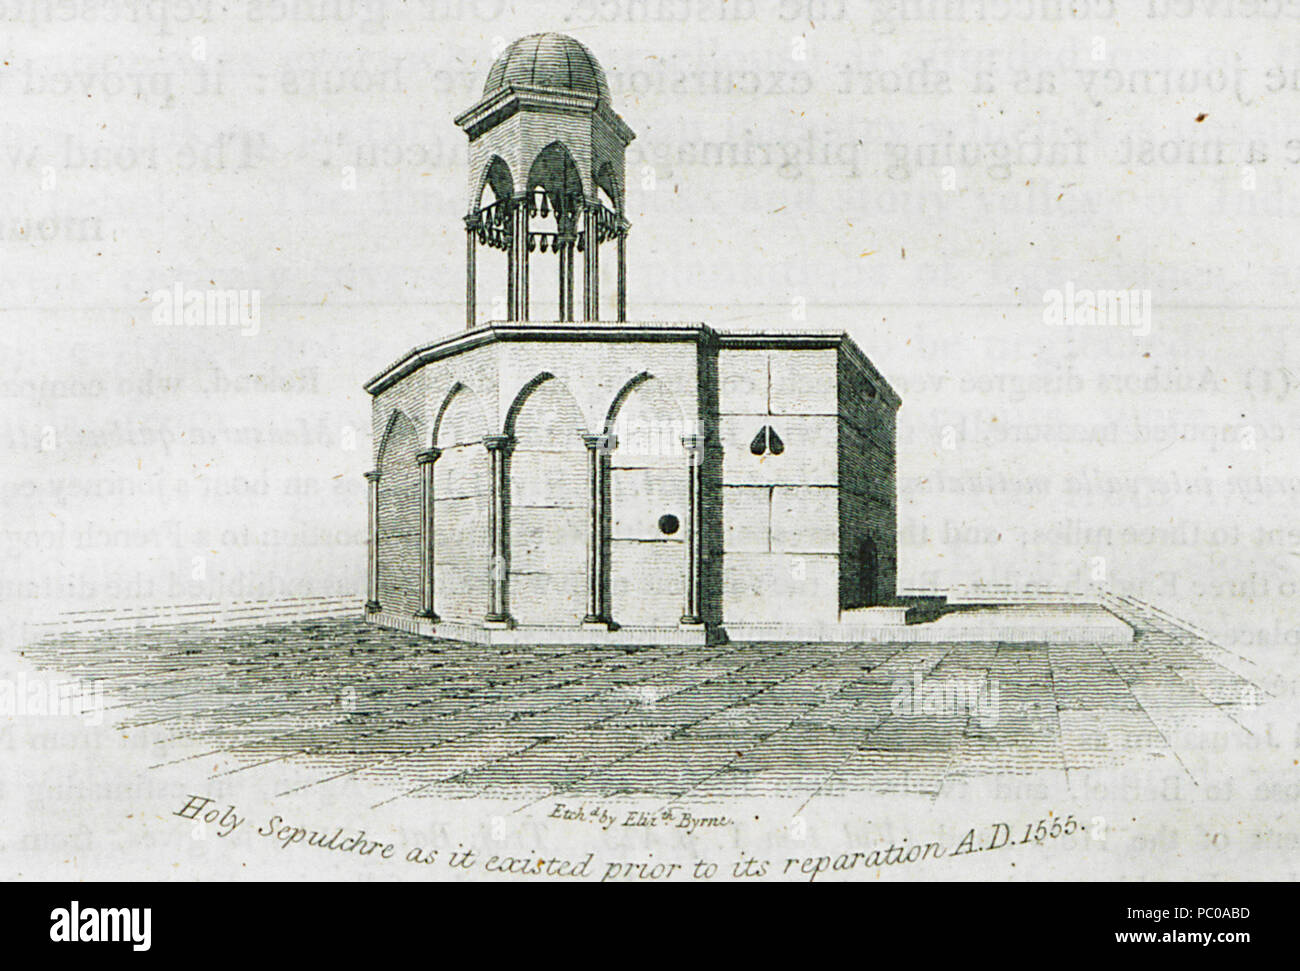 283 Holy Sepulchre as it existed prior to its reparation AD 1555 - Clarke Edward Daniel - 1824 Stock Photo